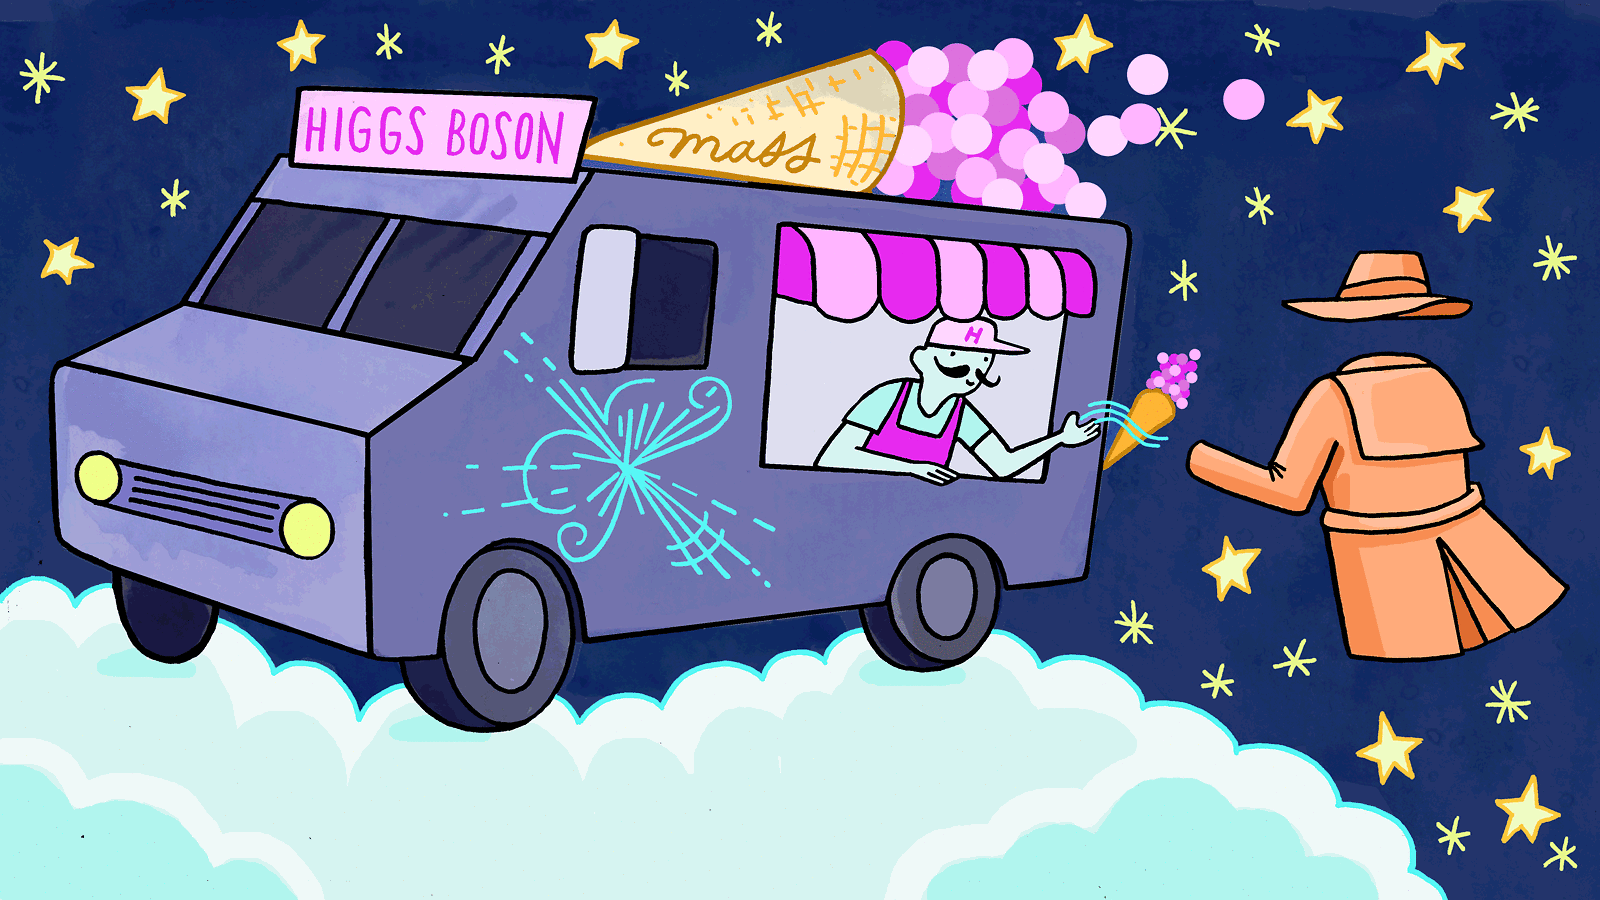 Illustration of Higgs boson ice cream truck being visited by the particle that isn't there